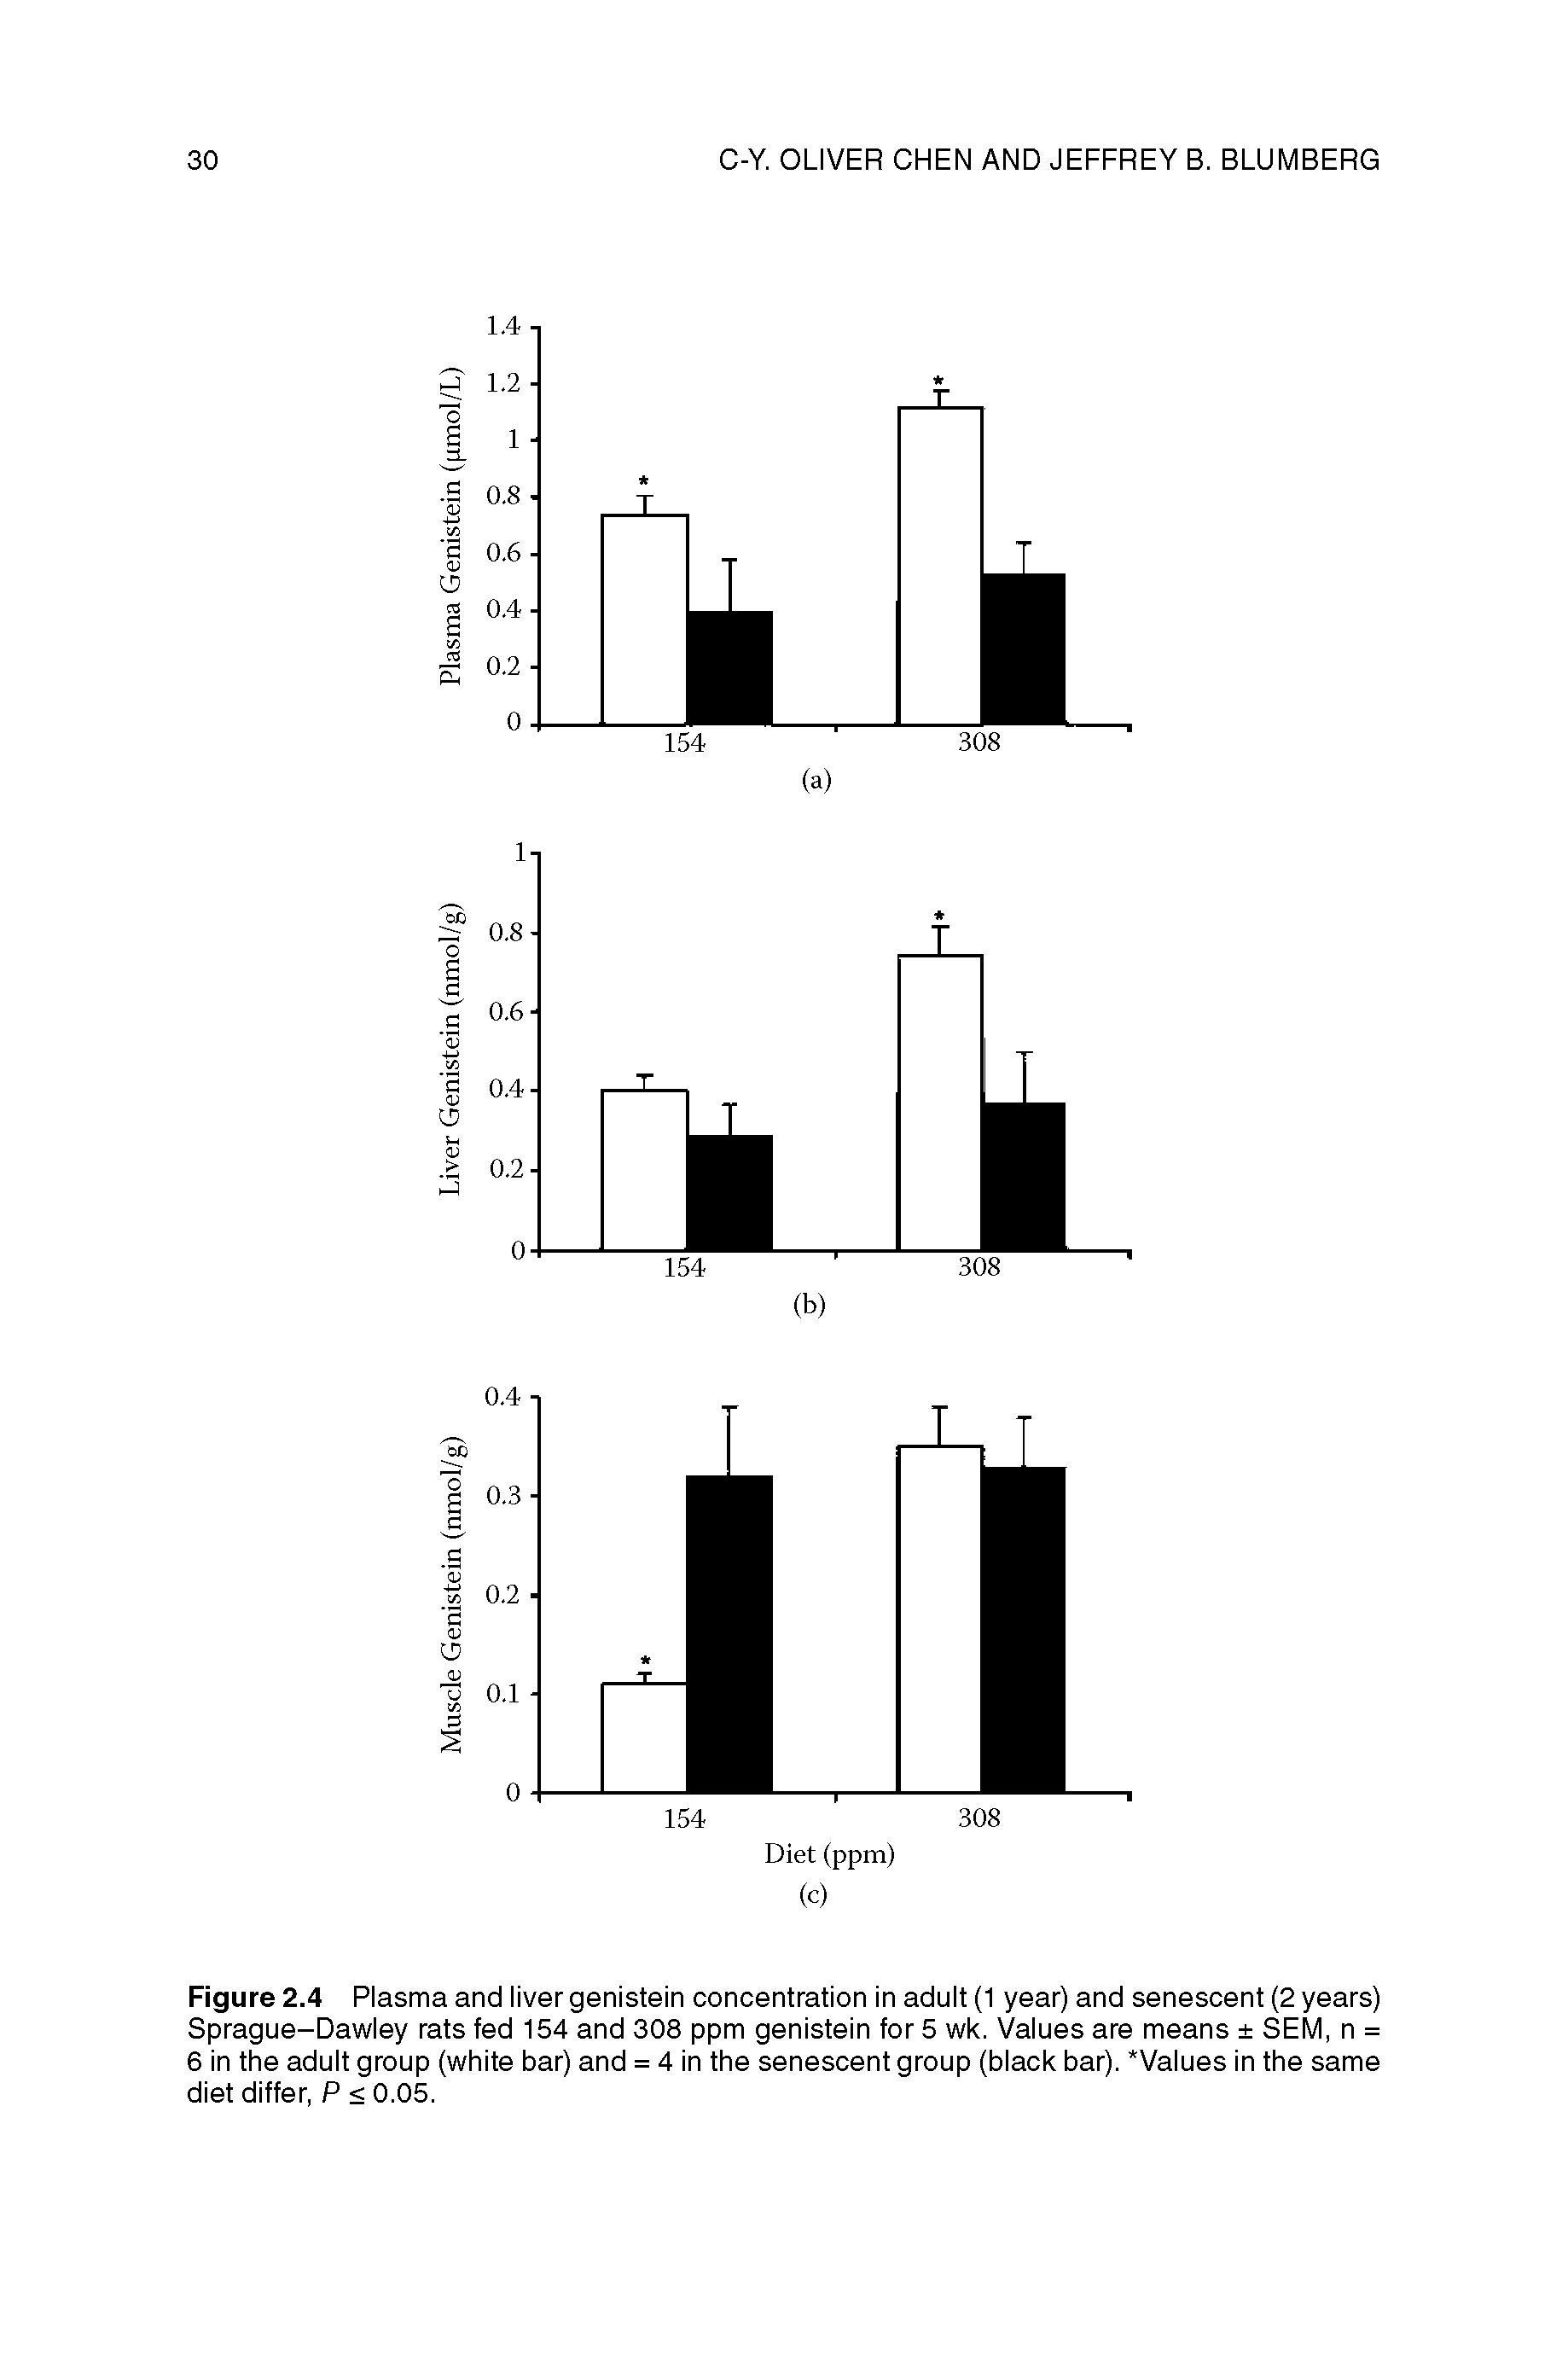 Figure 2.4 Plasma and liver genistein concentration in adult (1 year) and senescent (2 years) Sprague-Dawley rats fed 154 and 308 ppm genistein for 5 wk. Values are means SEM, n = 6 in the adult group (white bar) and = 4 in the senescent group (black bar). Values in the same diet differ, P < 0.05.